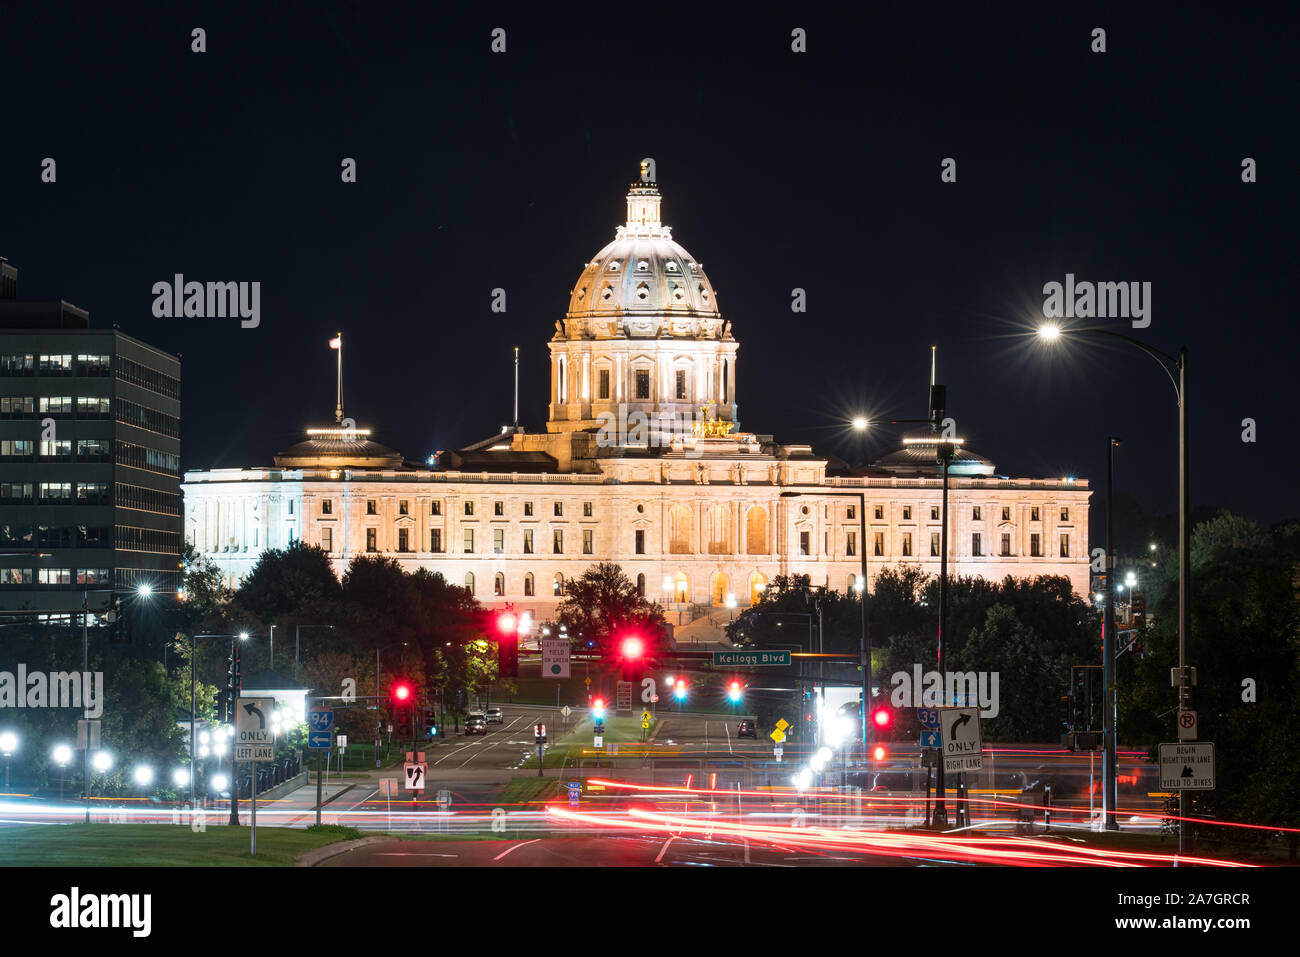 Facade of the Minnesota State Capitol Building in St Paul at night Stock Photo